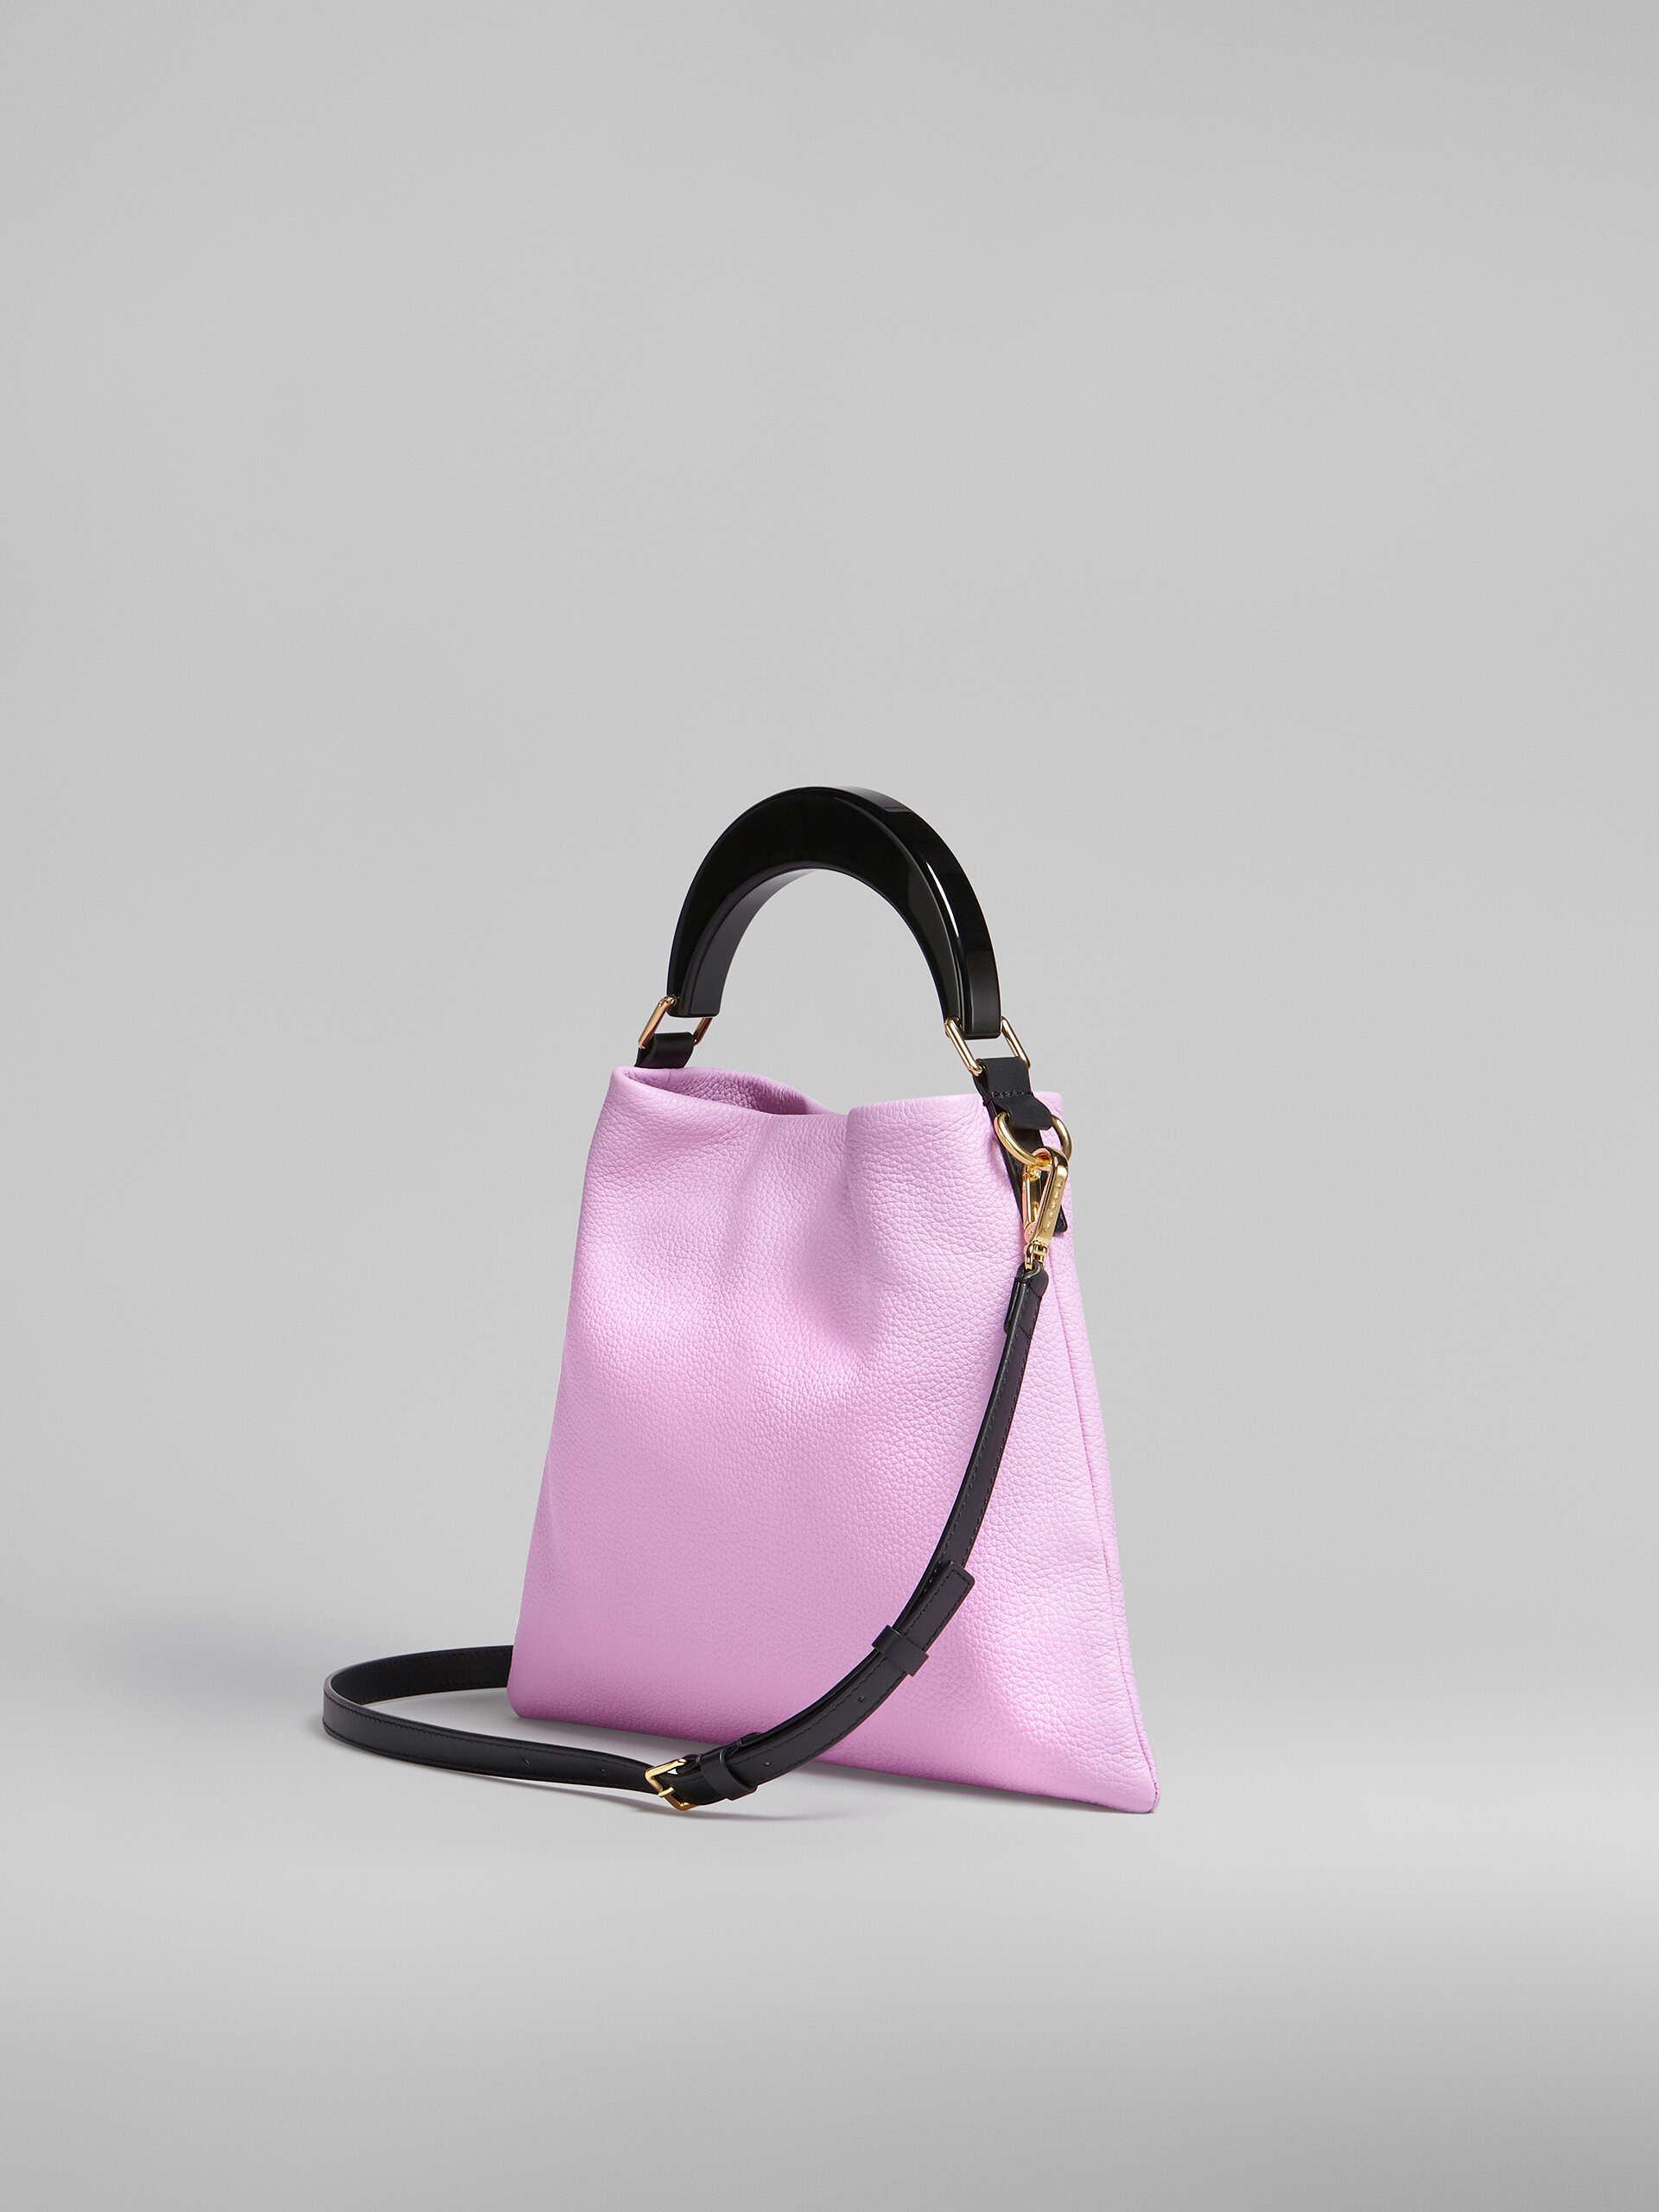 Venice small bag in pink leather - Shoulder Bags - Image 3